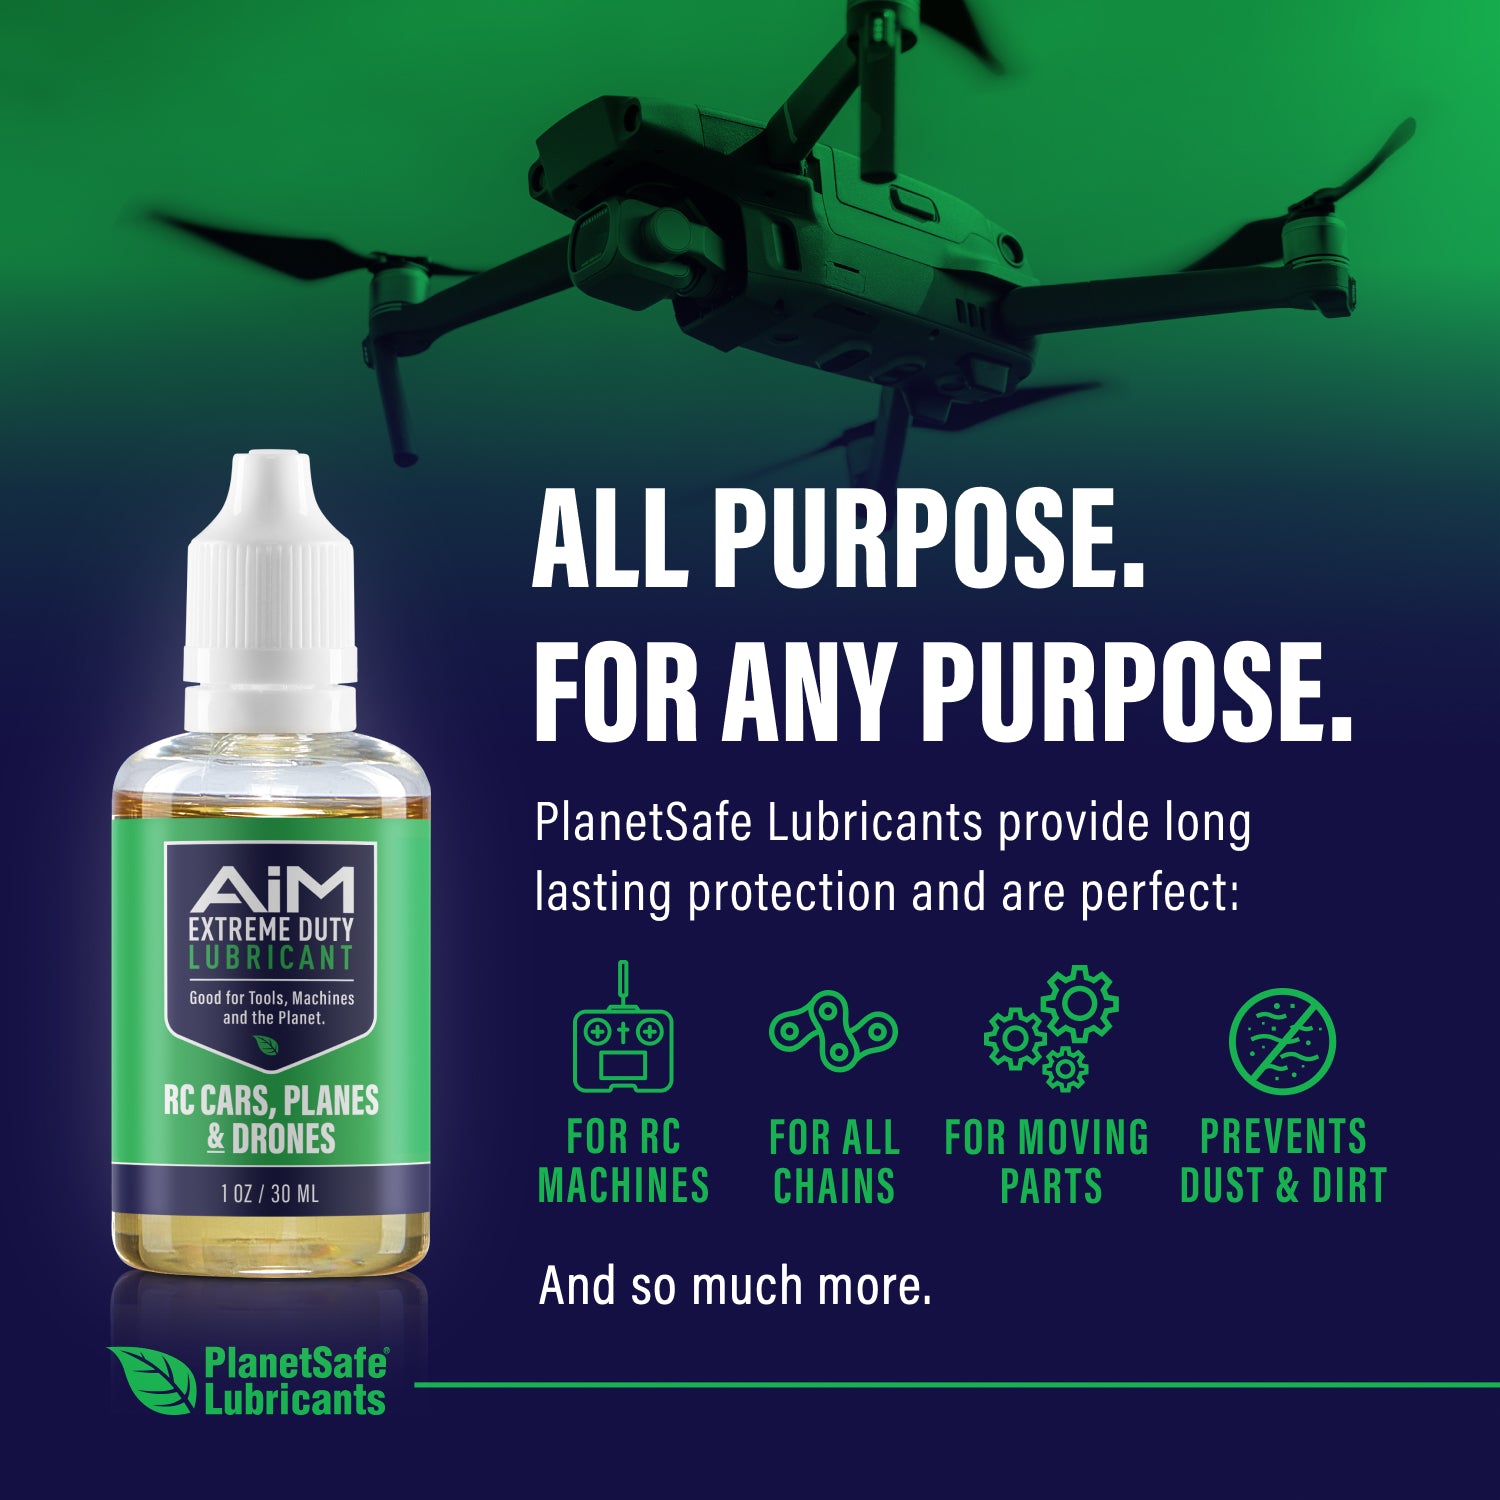 Planet Safe Lubricants RC Car Drones and Planes lubricant - the worlds best lube for RC cars RC planes and drones - radio controlled